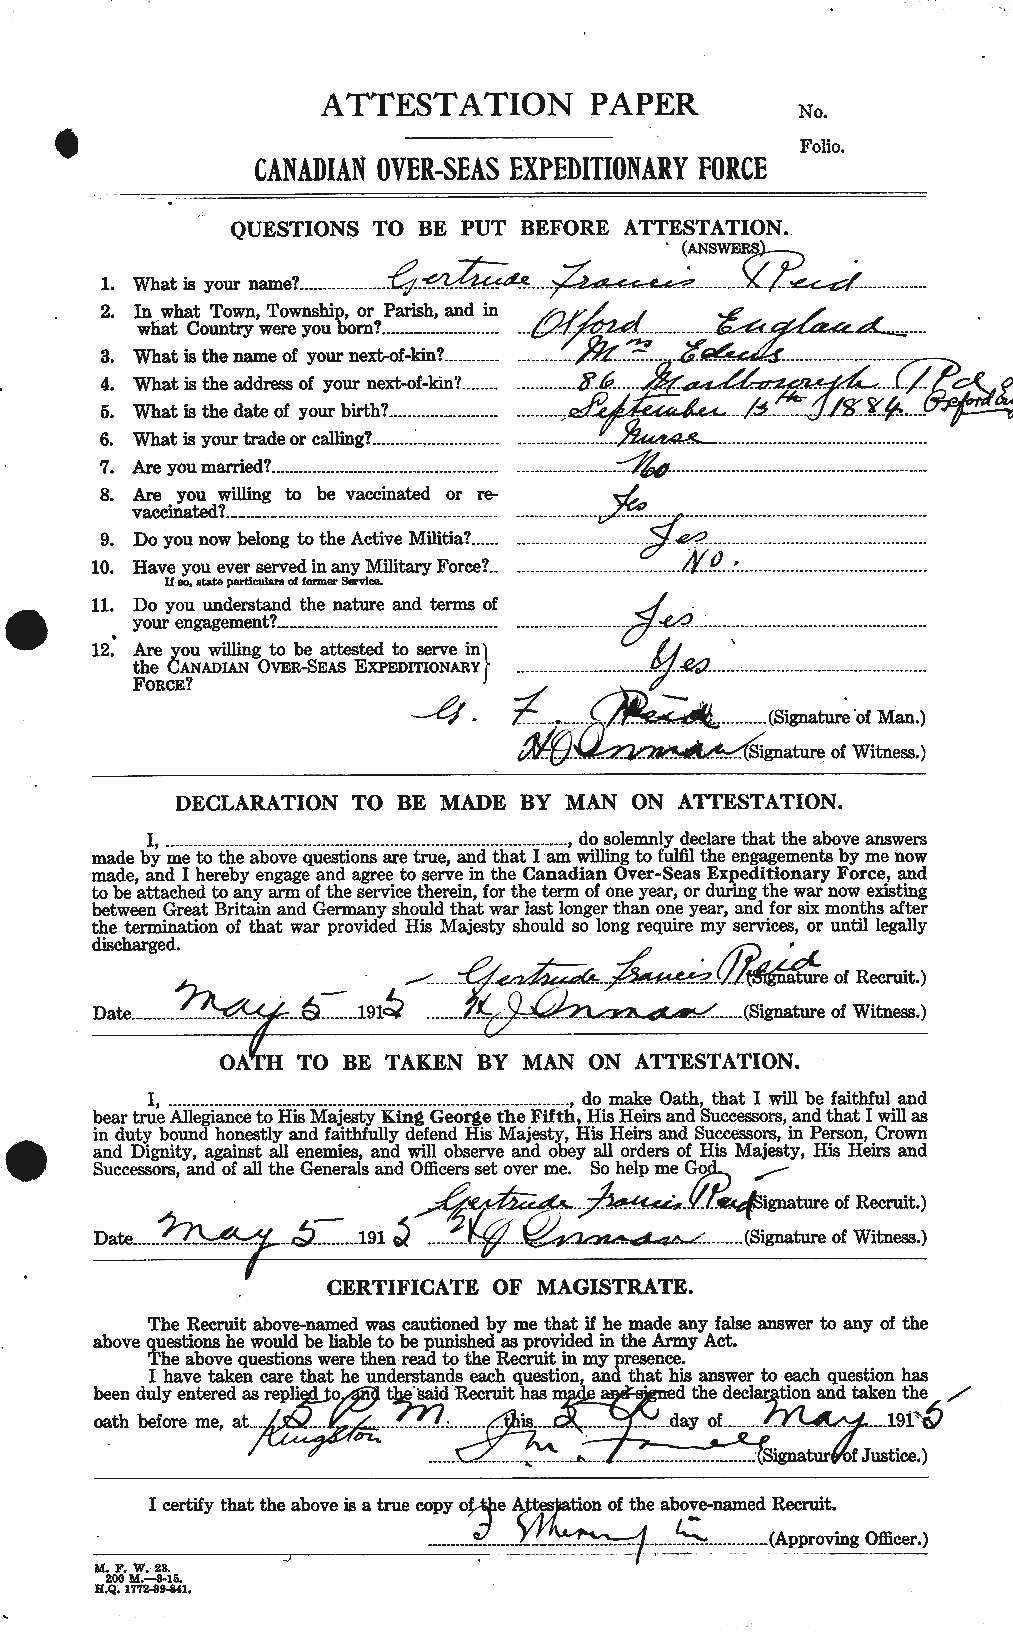 Personnel Records of the First World War - CEF 598552a